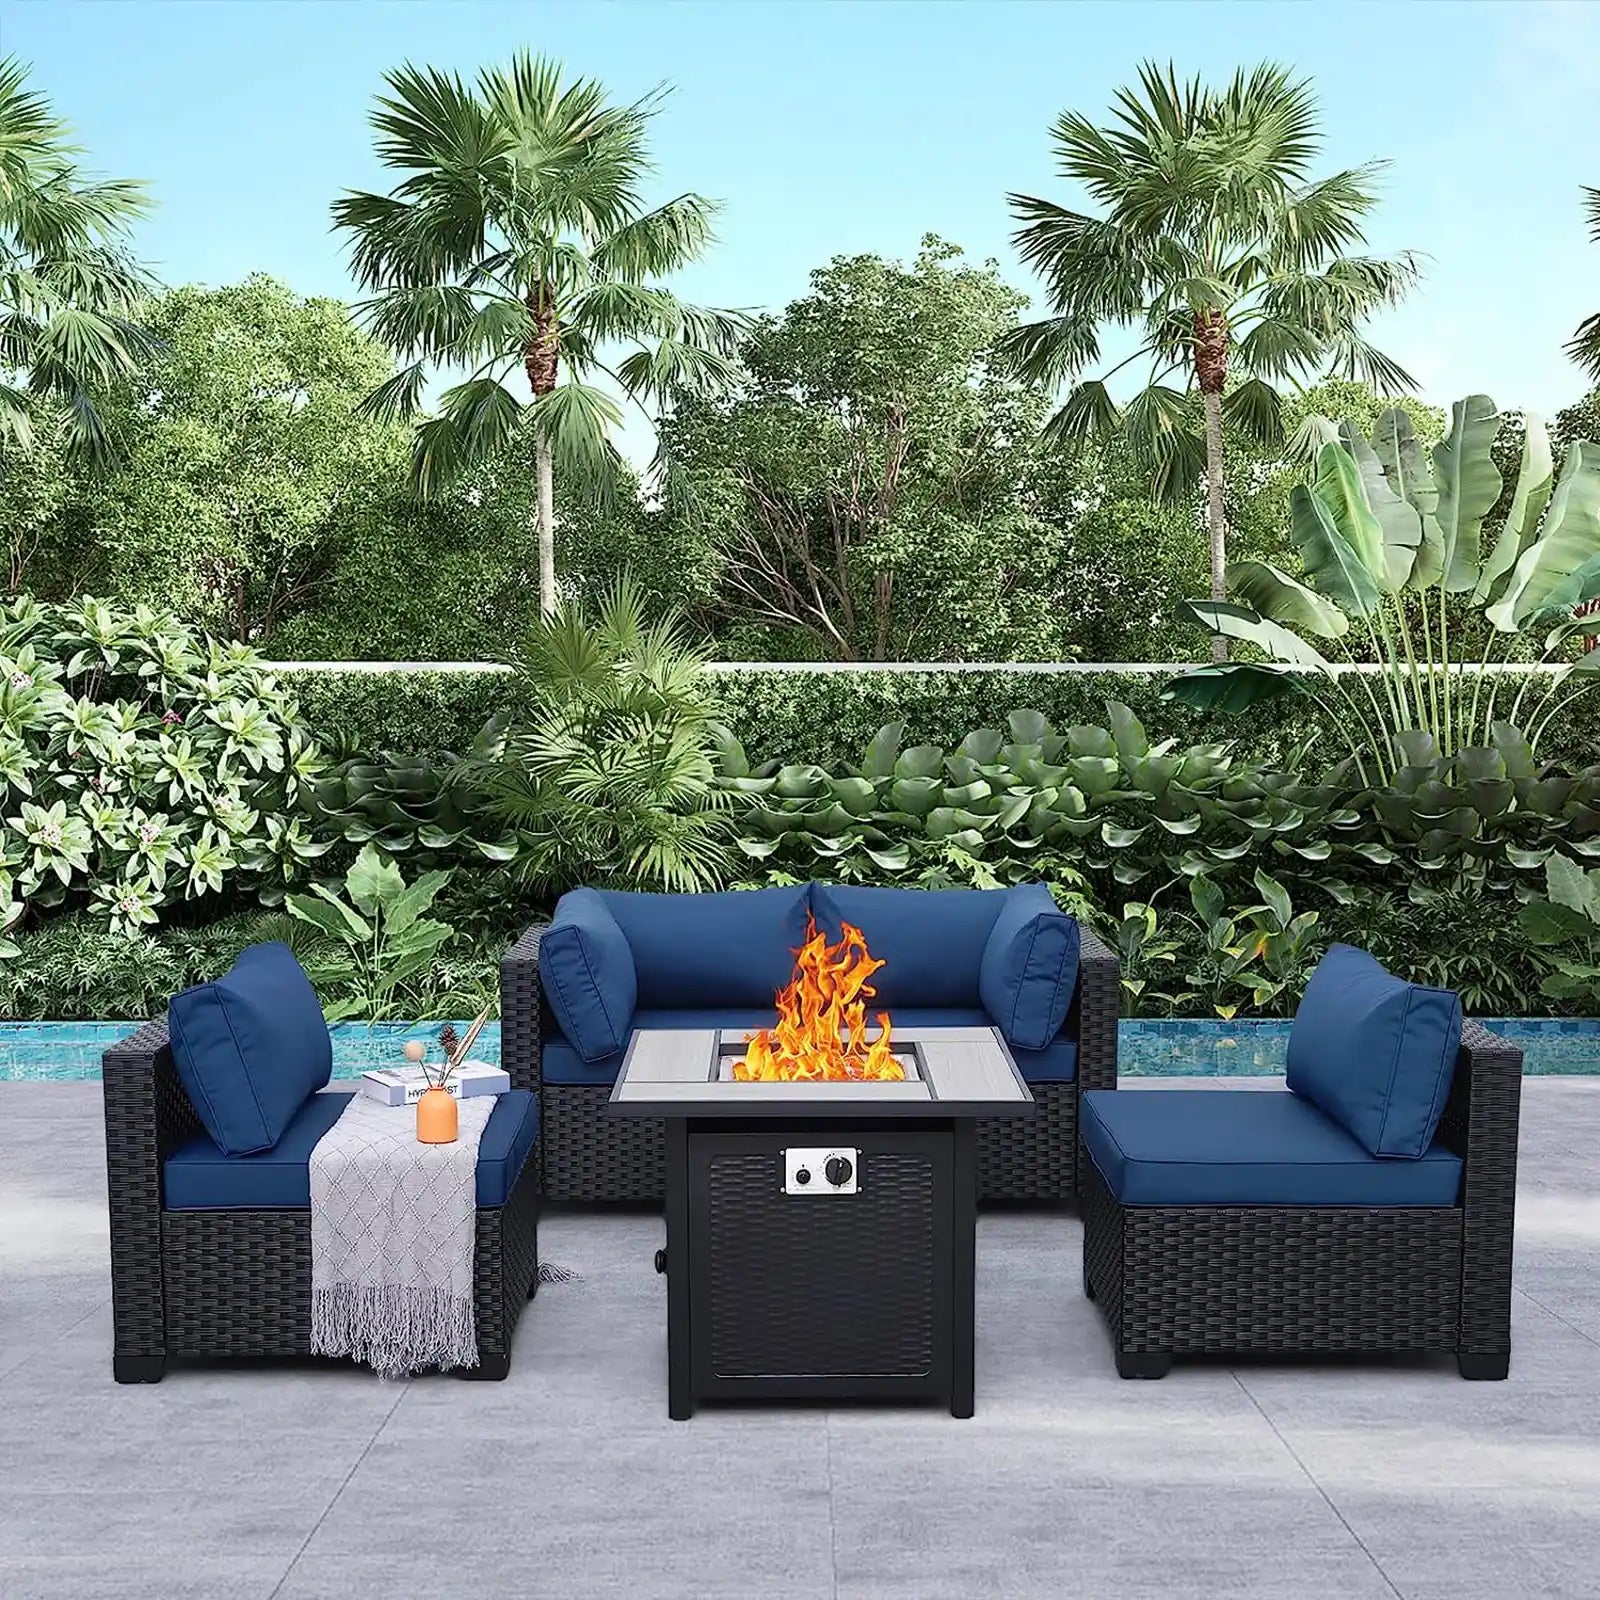 Outdoor Patio PE Wicker 5 Piece Furniture Set, Black Rattan Sectional Conversation Sofa Chair with Square Propane Fire Pit Table, Navy Blue Cushion